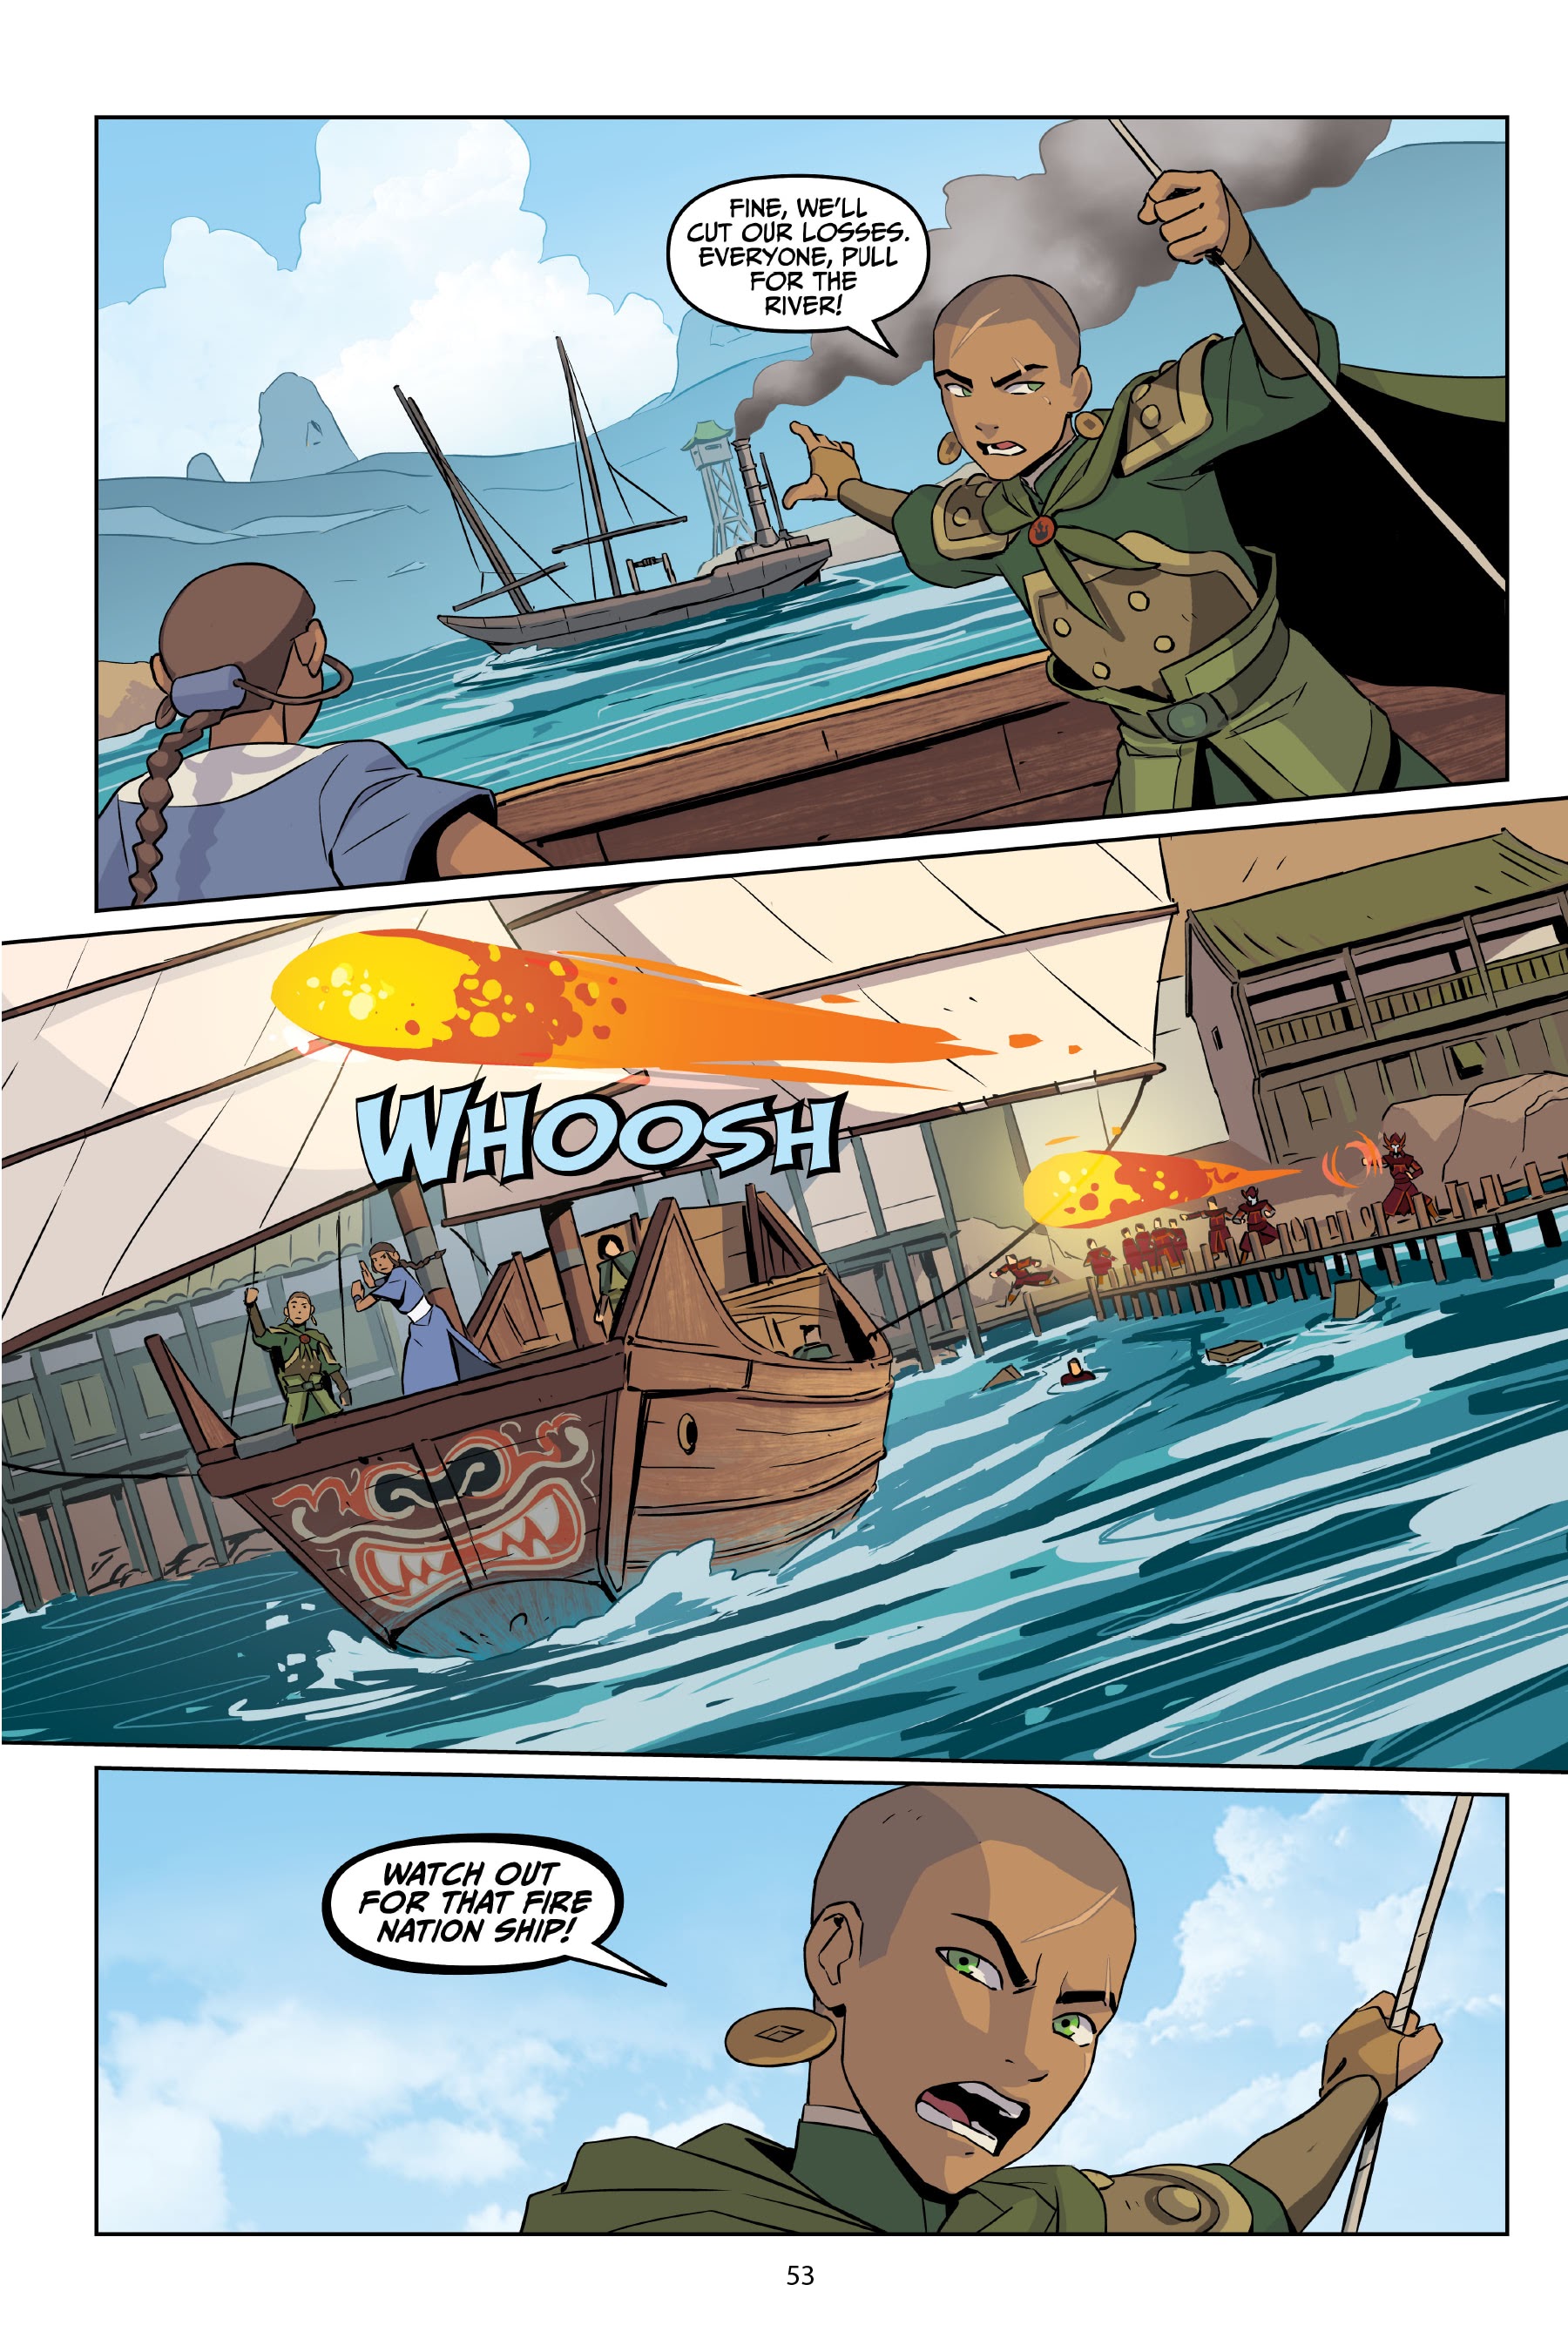 Read online Avatar: The Last Airbender—Katara and the Pirate's Silver comic -  Issue # TPB - 54